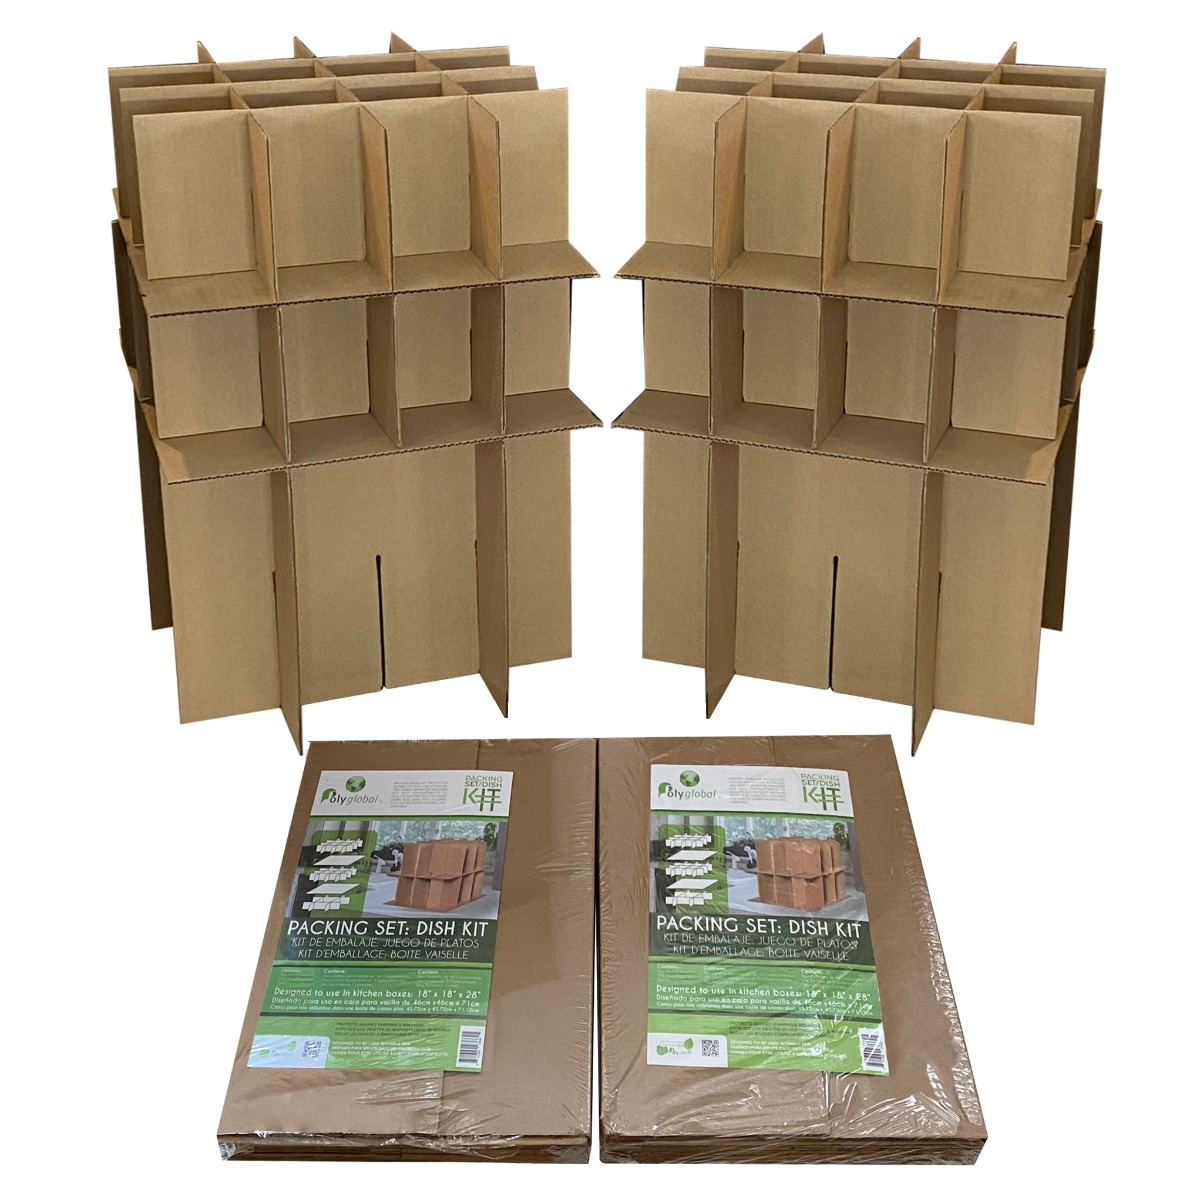 UBMOVE Dish &amp; Glass Partition Insert Kit 4 pack fits in our kitchen boxes